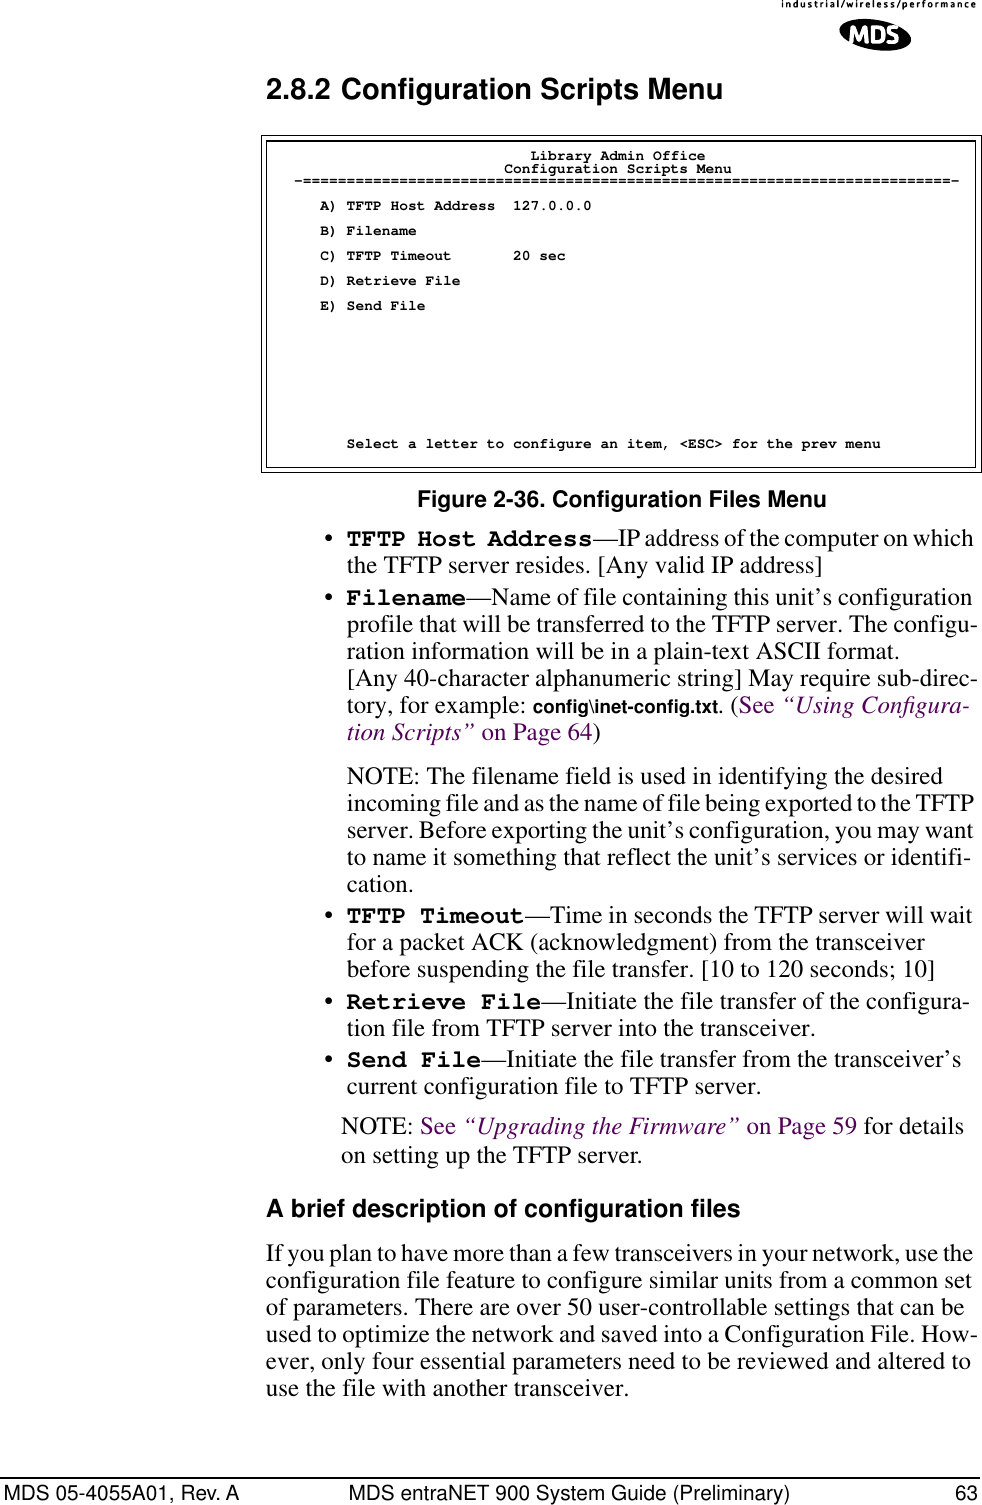 MDS 05-4055A01, Rev. A MDS entraNET 900 System Guide (Preliminary) 632.8.2 Configuration Scripts MenuFigure 2-36. Configuration Files Menu•TFTP Host Address—IP address of the computer on which the TFTP server resides. [Any valid IP address]•Filename—Name of file containing this unit’s configuration profile that will be transferred to the TFTP server. The configu-ration information will be in a plain-text ASCII format.[Any 40-character alphanumeric string] May require sub-direc-tory, for example: conﬁg\inet-conﬁg.txt. (See “Using Conﬁgura-tion Scripts” on Page 64)NOTE: The filename field is used in identifying the desired incoming file and as the name of file being exported to the TFTP server. Before exporting the unit’s configuration, you may want to name it something that reflect the unit’s services or identifi-cation.•TFTP Timeout—Time in seconds the TFTP server will wait for a packet ACK (acknowledgment) from the transceiver before suspending the file transfer. [10 to 120 seconds; 10]•Retrieve File—Initiate the file transfer of the configura-tion file from TFTP server into the transceiver.•Send File—Initiate the file transfer from the transceiver’s current configuration file to TFTP server.NOTE: See “Upgrading the Firmware” on Page 59 for details on setting up the TFTP server.A brief description of configuration filesIf you plan to have more than a few transceivers in your network, use the configuration file feature to configure similar units from a common set of parameters. There are over 50 user-controllable settings that can be used to optimize the network and saved into a Configuration File. How-ever, only four essential parameters need to be reviewed and altered to use the file with another transceiver.                              Library Admin Office                          Configuration Scripts Menu  -==========================================================================-     A) TFTP Host Address  127.0.0.0     B) Filename     C) TFTP Timeout       20 sec     D) Retrieve File     E) Send File        Select a letter to configure an item, &lt;ESC&gt; for the prev menu